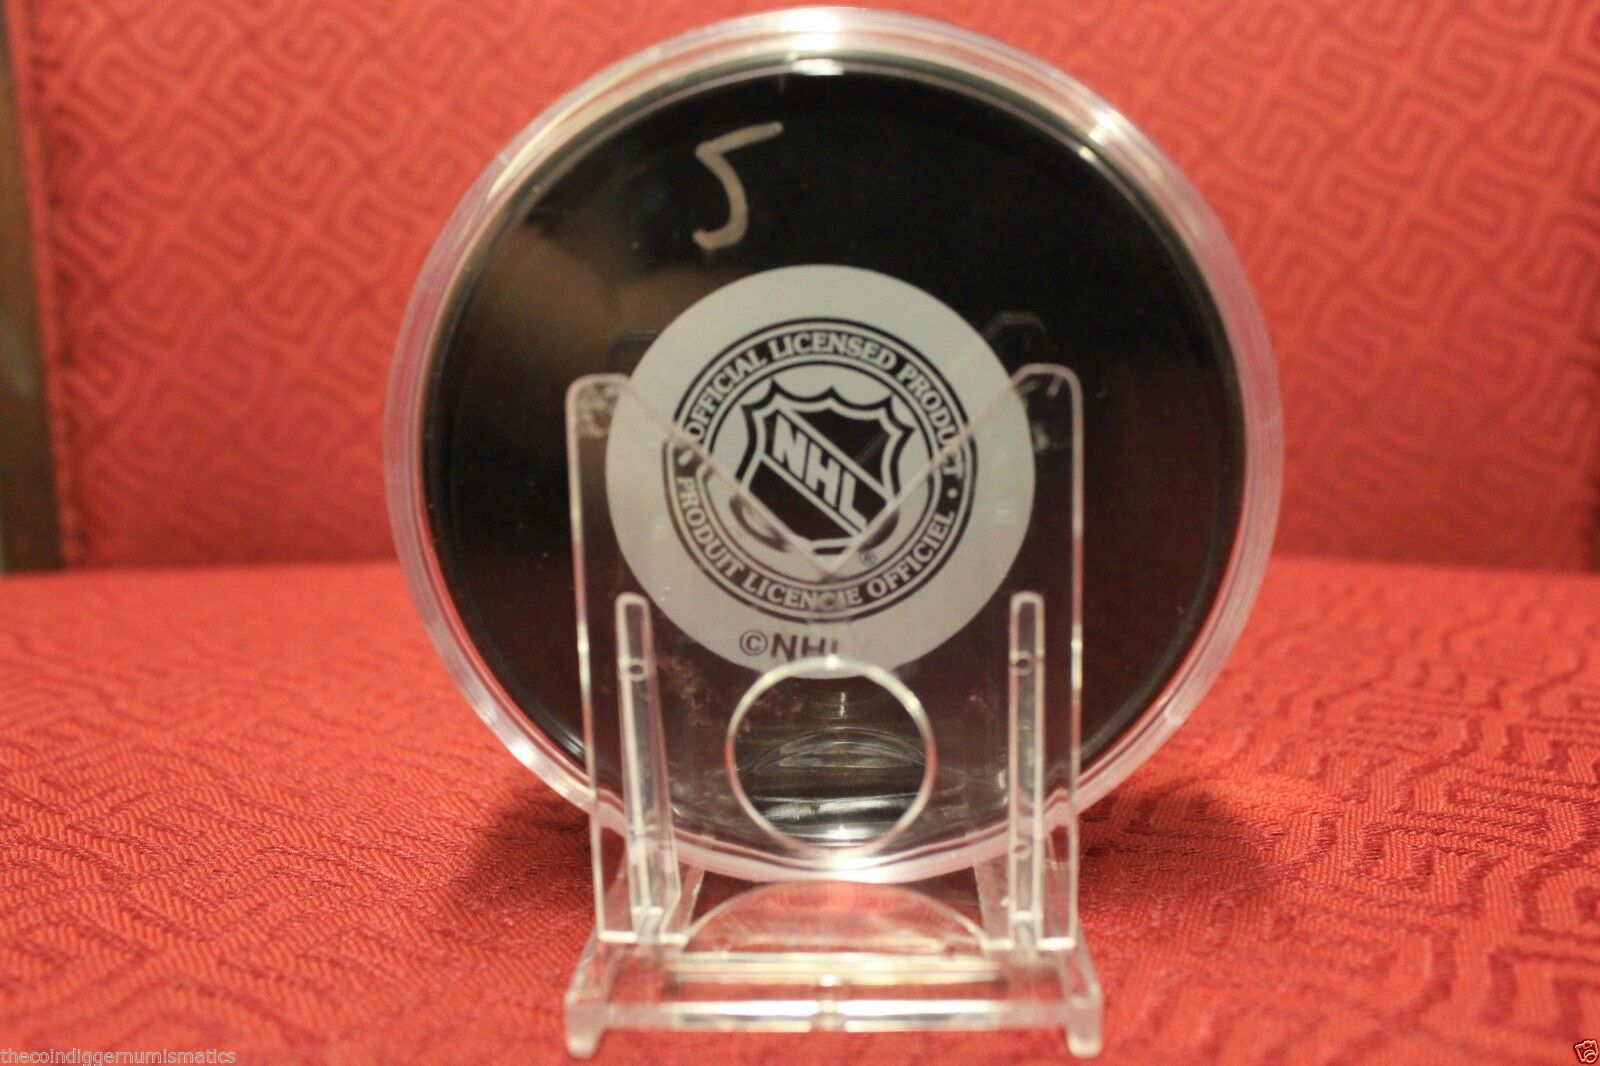 NHL Hockey Puck Holders by Pro-Mold